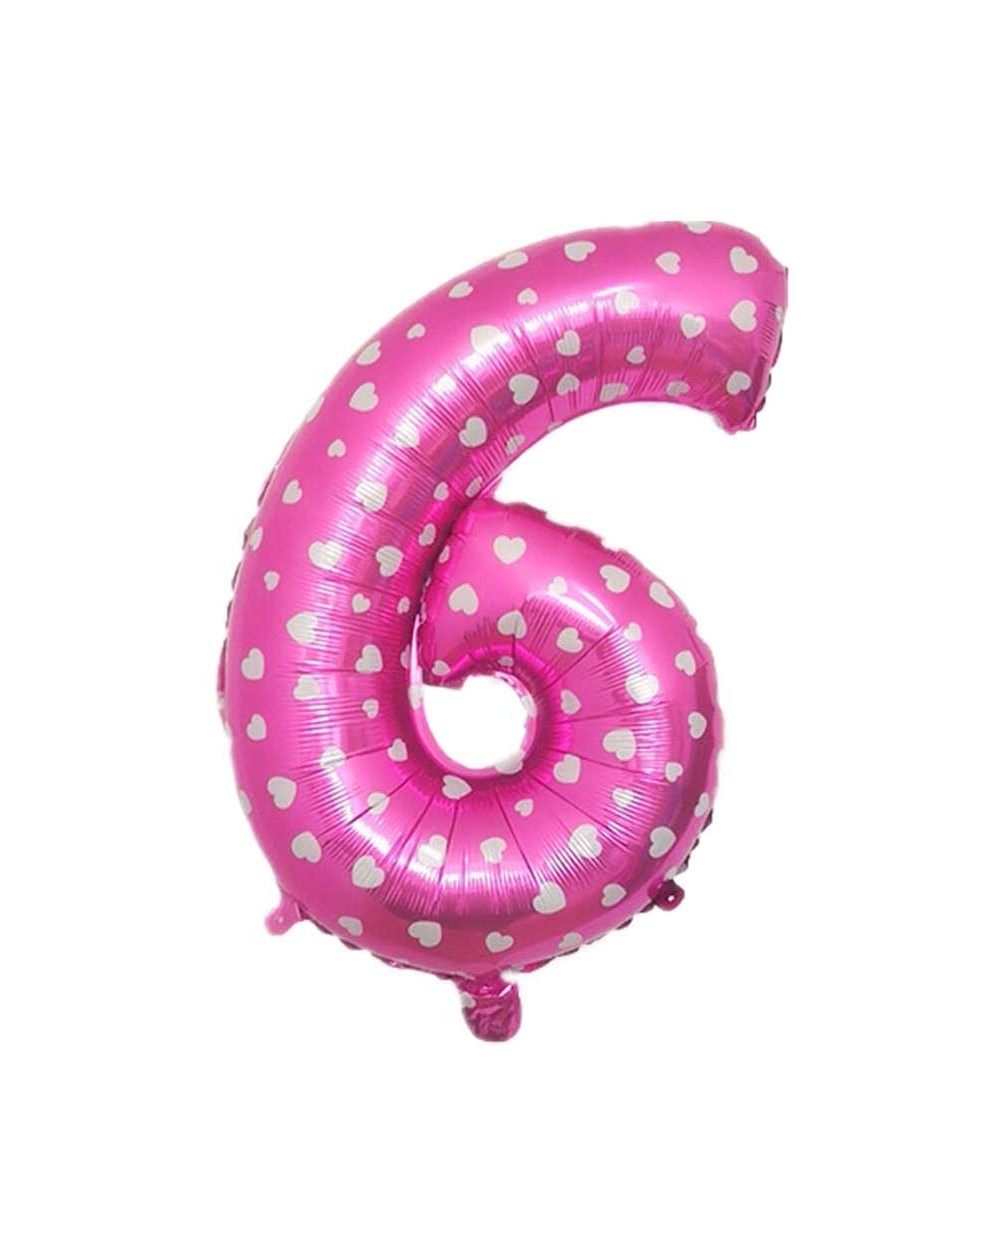 Balloons 32 Inch Large Printed Pink Number Balloons Foil Helium Balloons Birthday Party Wedding Bachelorette Bridal Shower Gr...